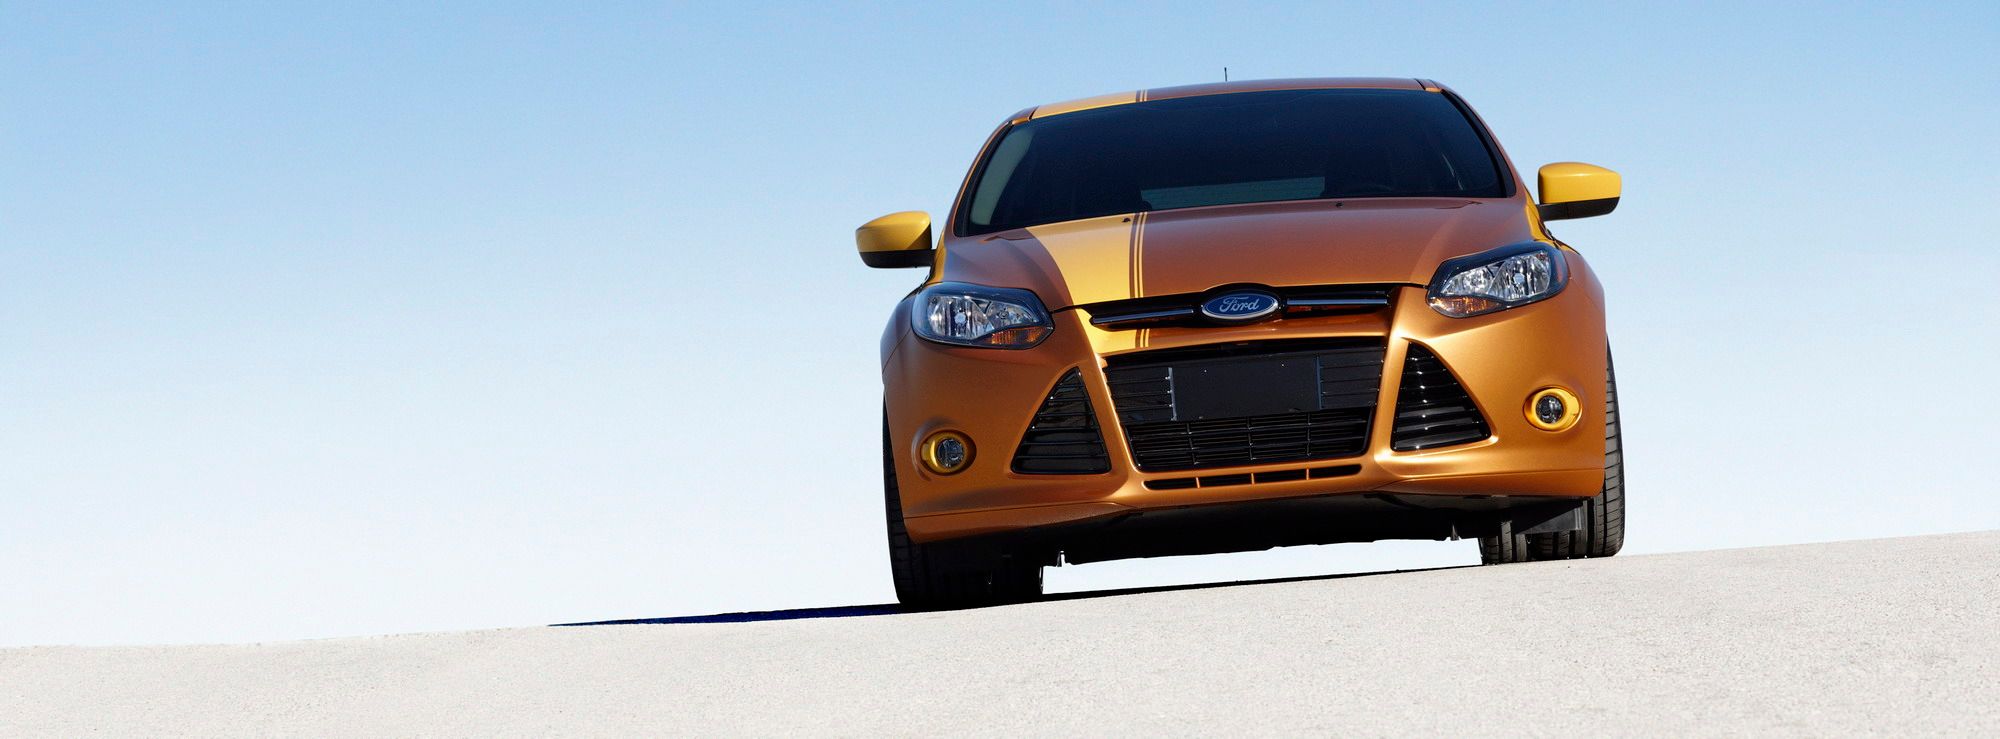 2012 Ford Focus by FSWerks